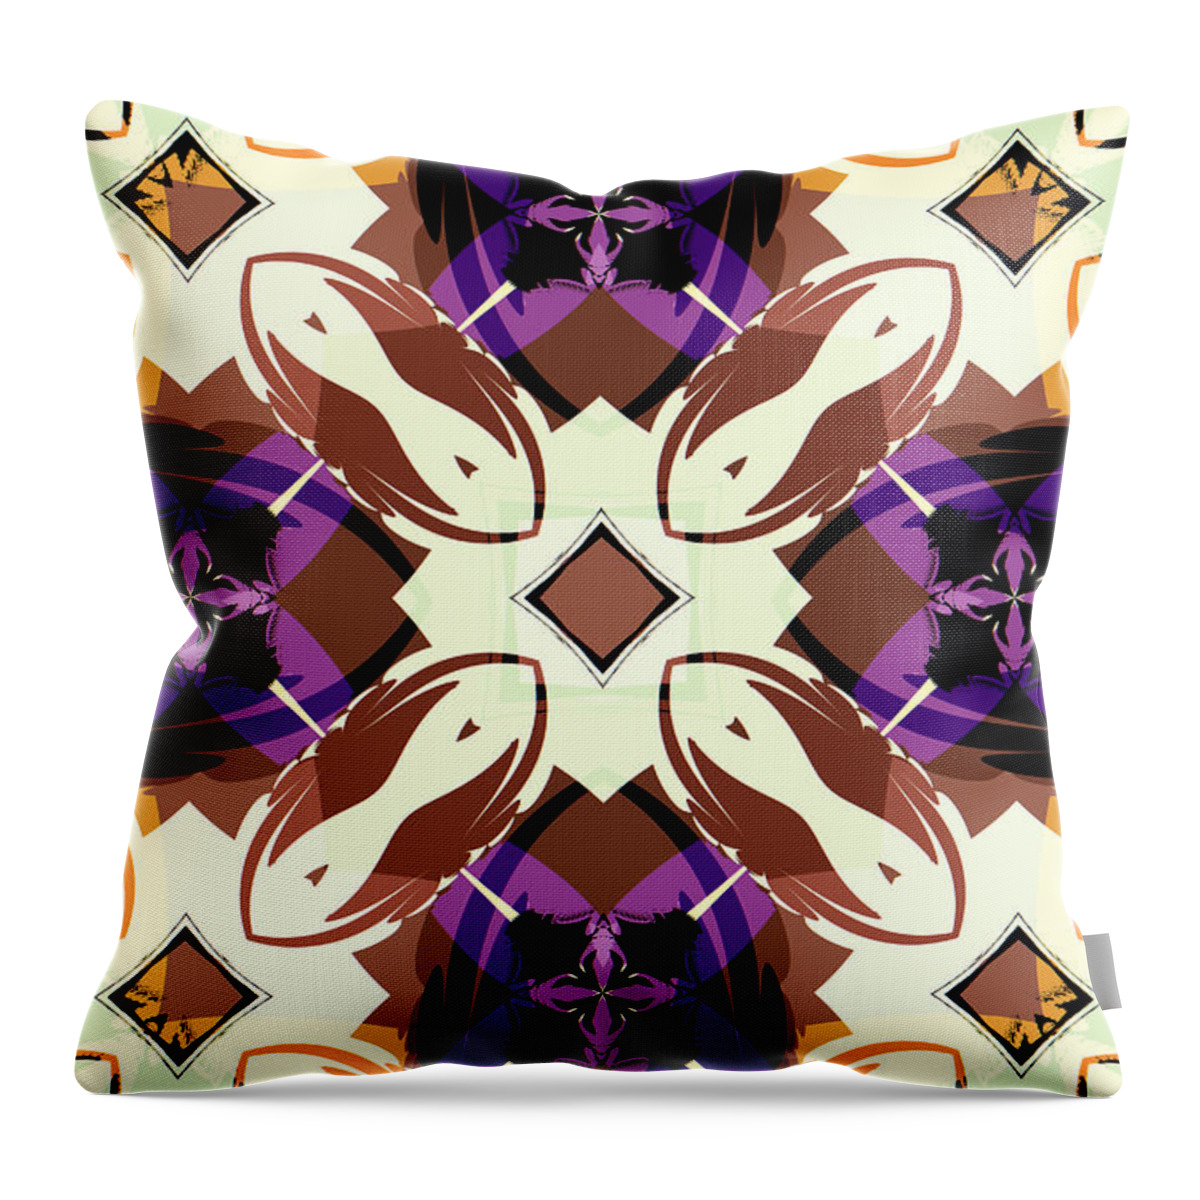 Abstract Throw Pillow featuring the digital art Foreplay by Jim Pavelle